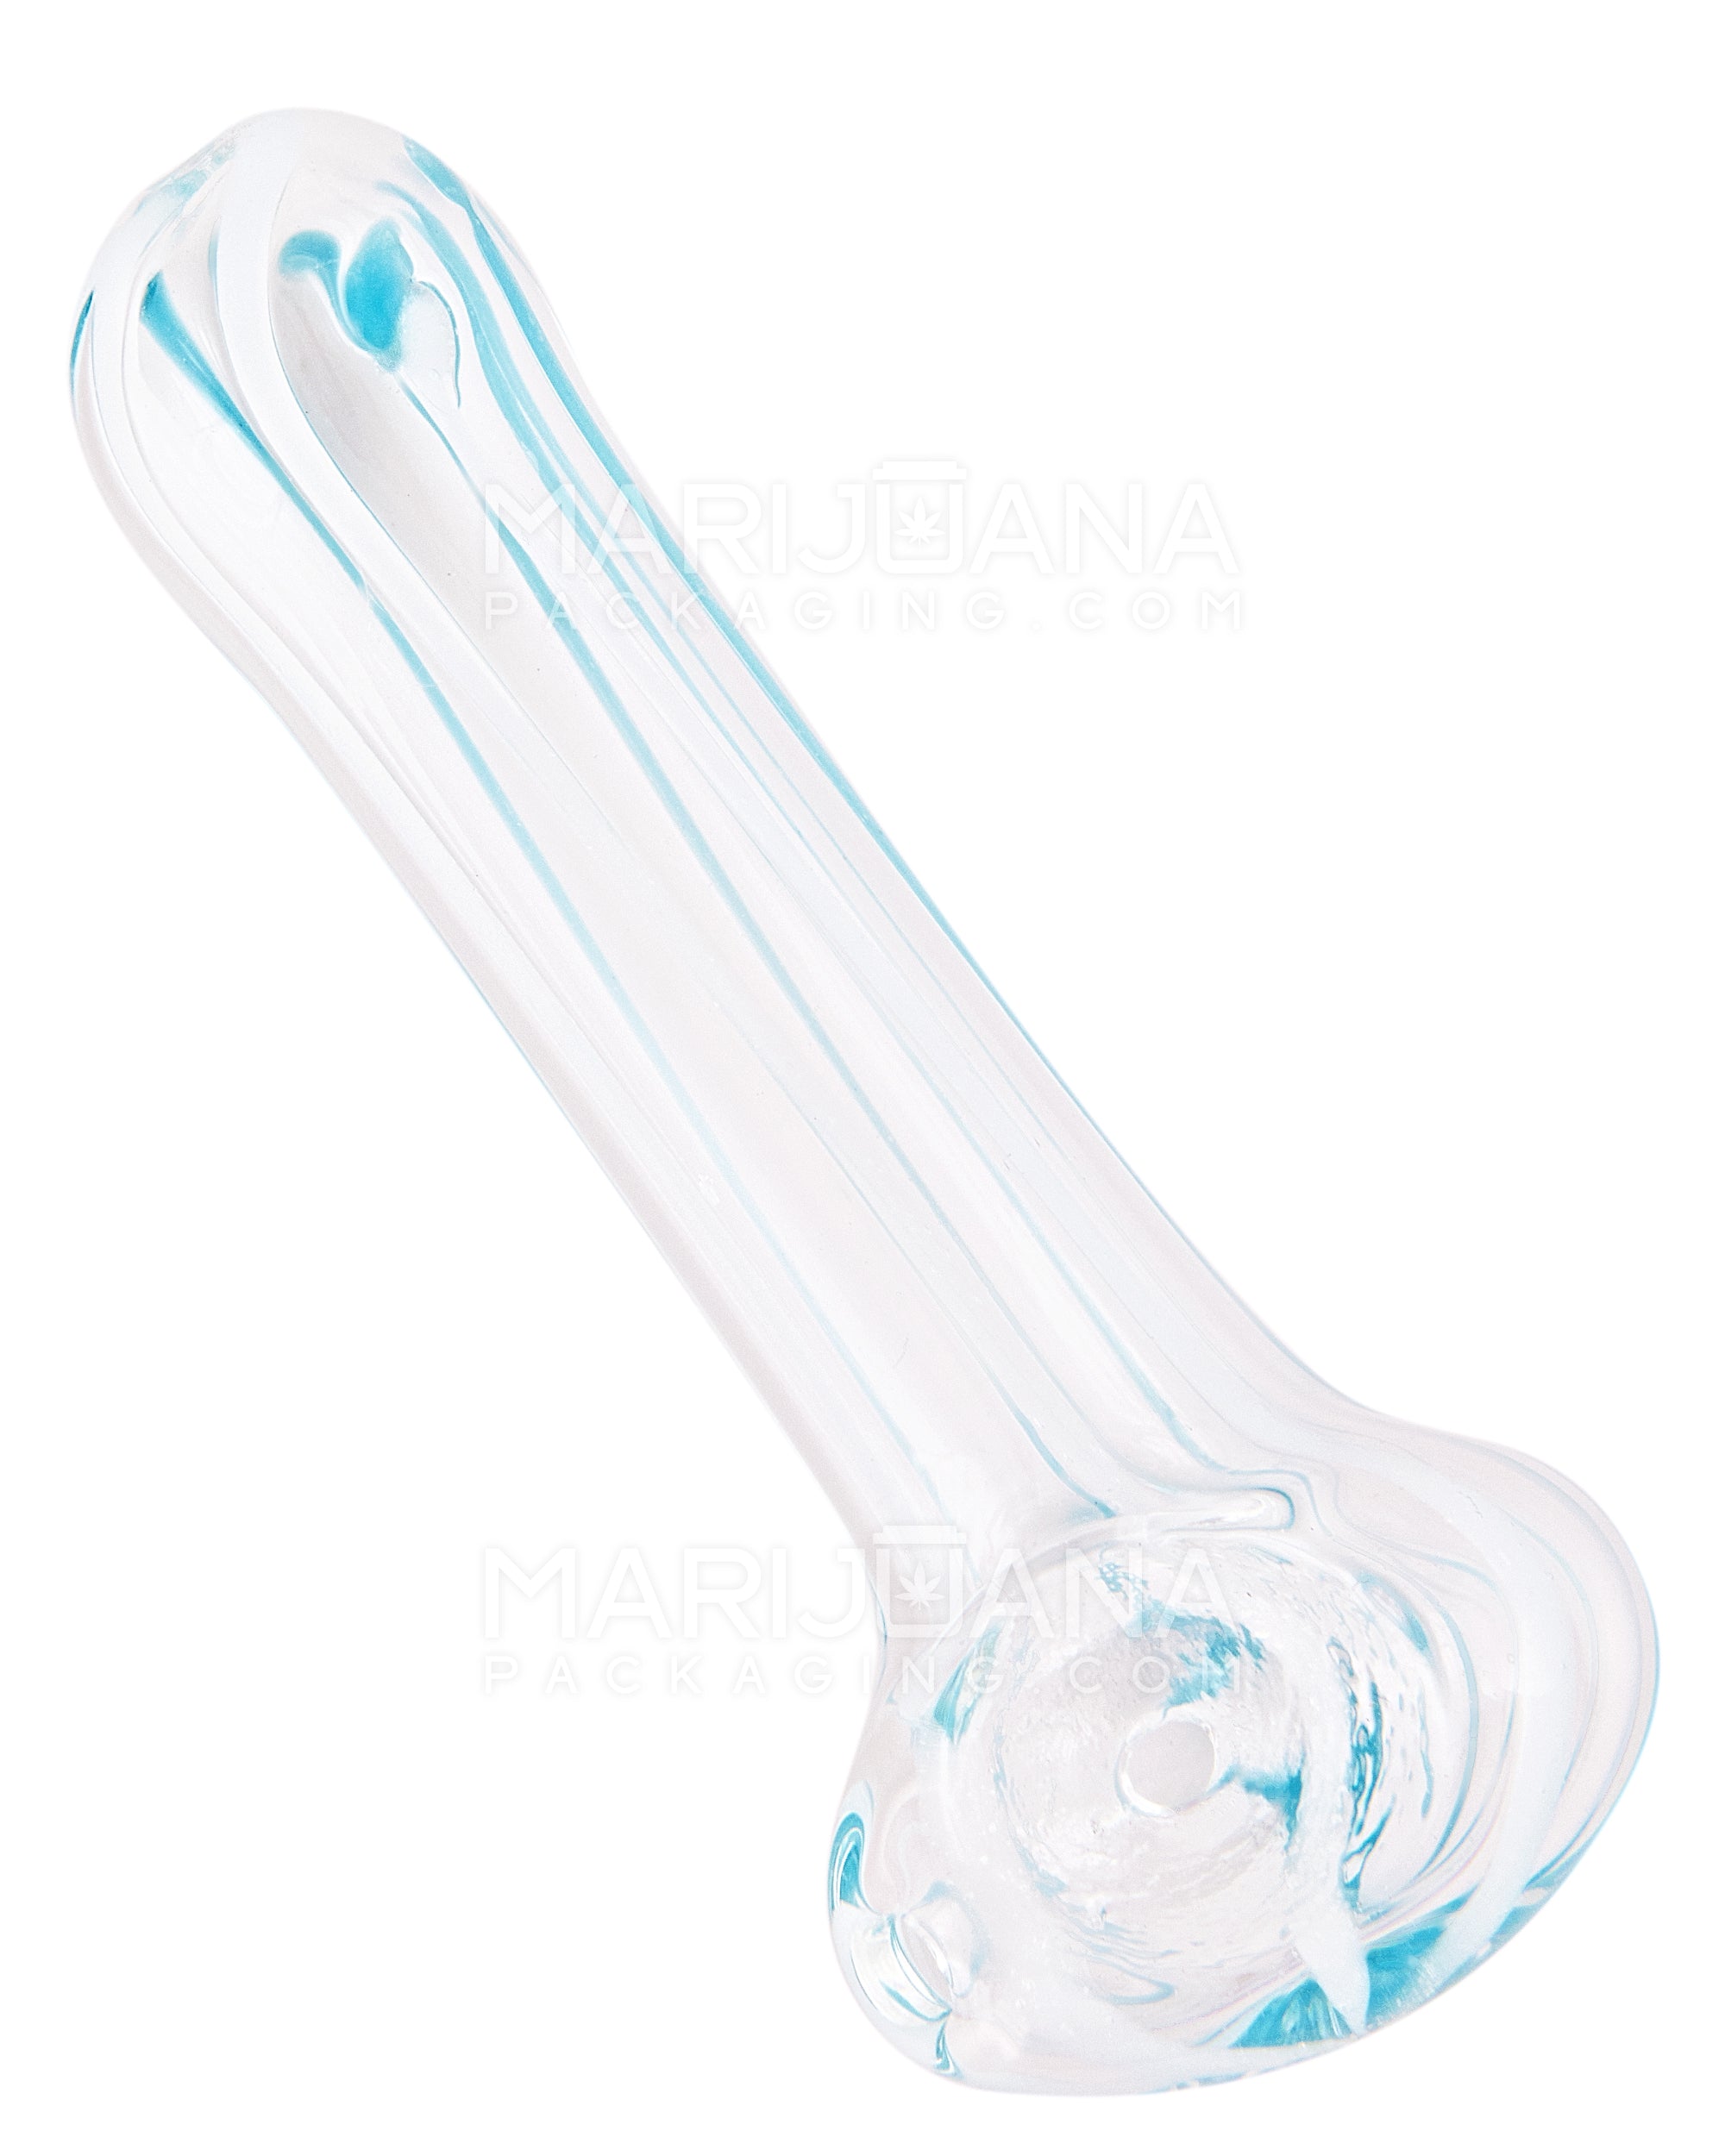 Assorted Swirl Spoon Hand Pipe | 2.5in Long - Glass - 50 Count - 9